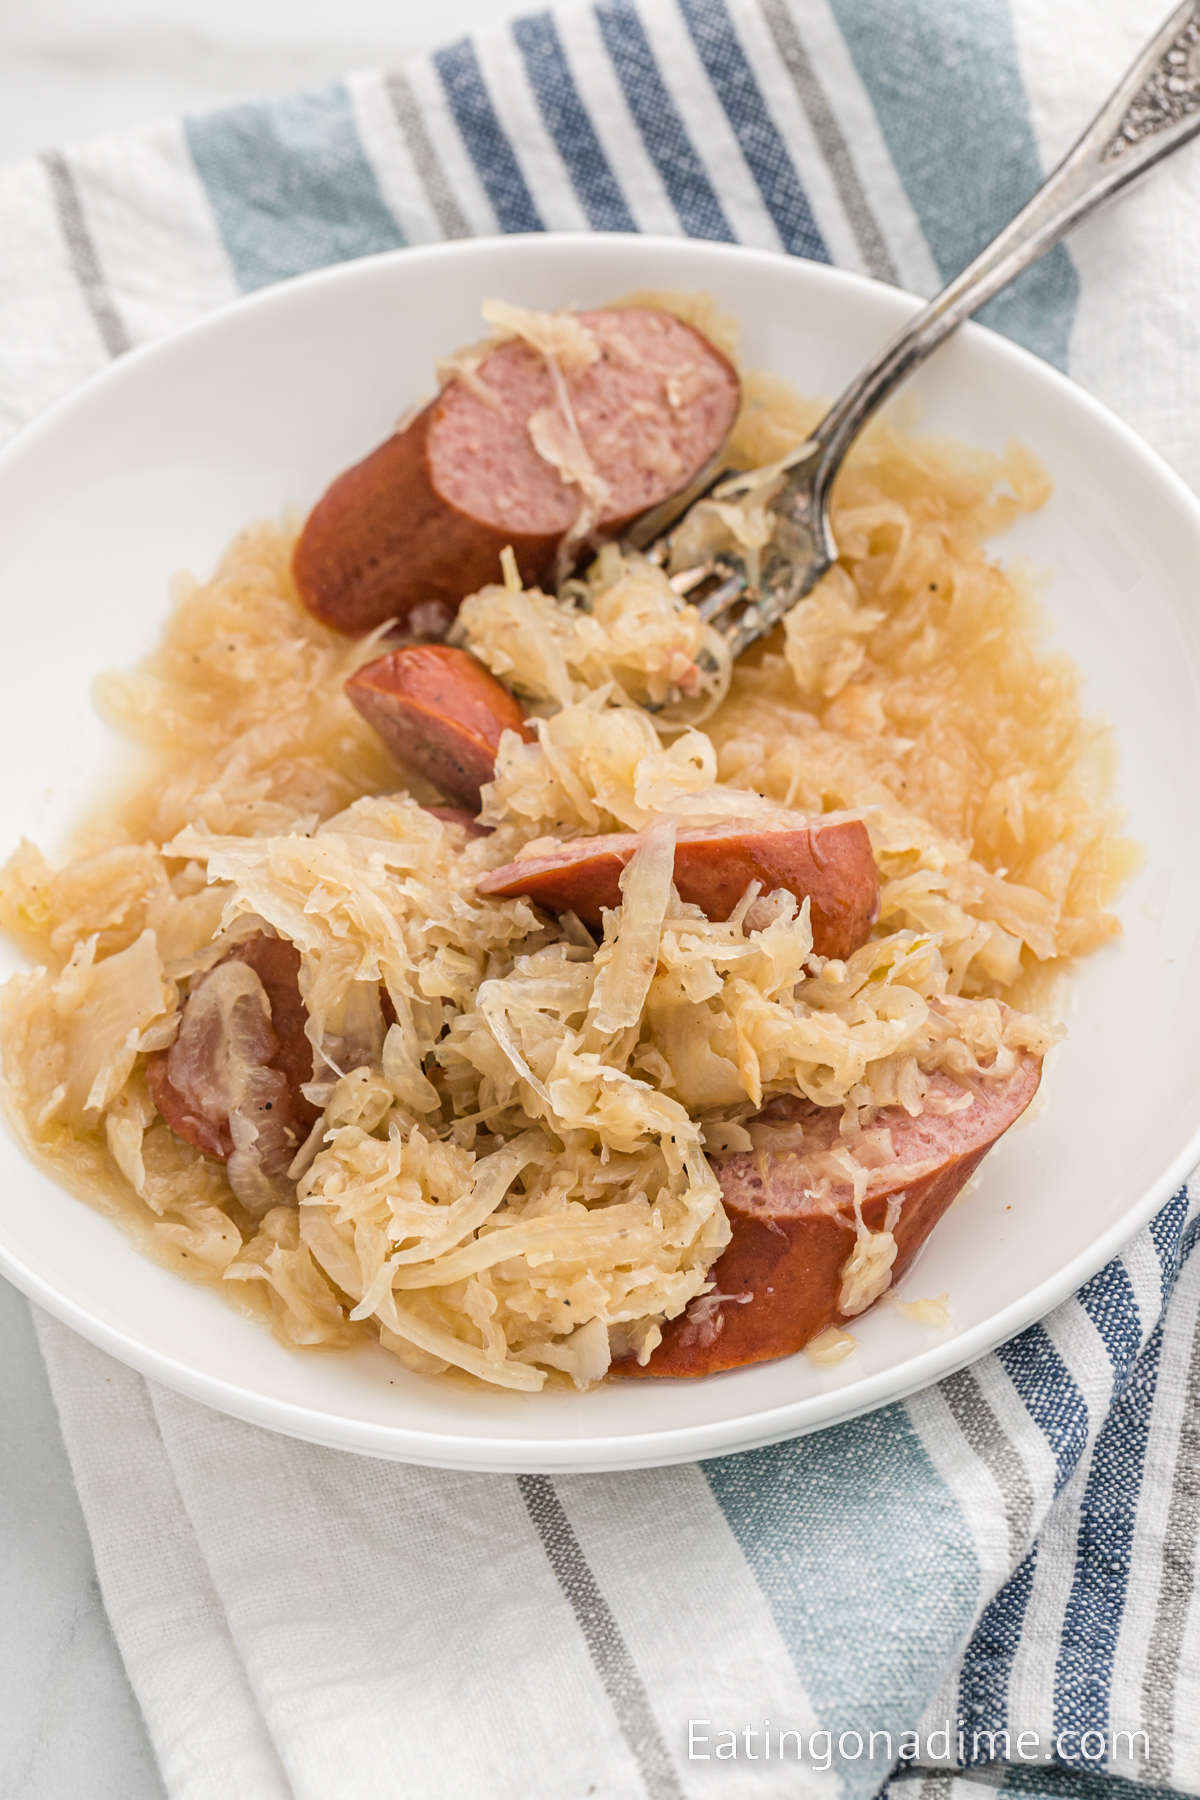 Sauerkraut and slice sausage on a white plate with a fork